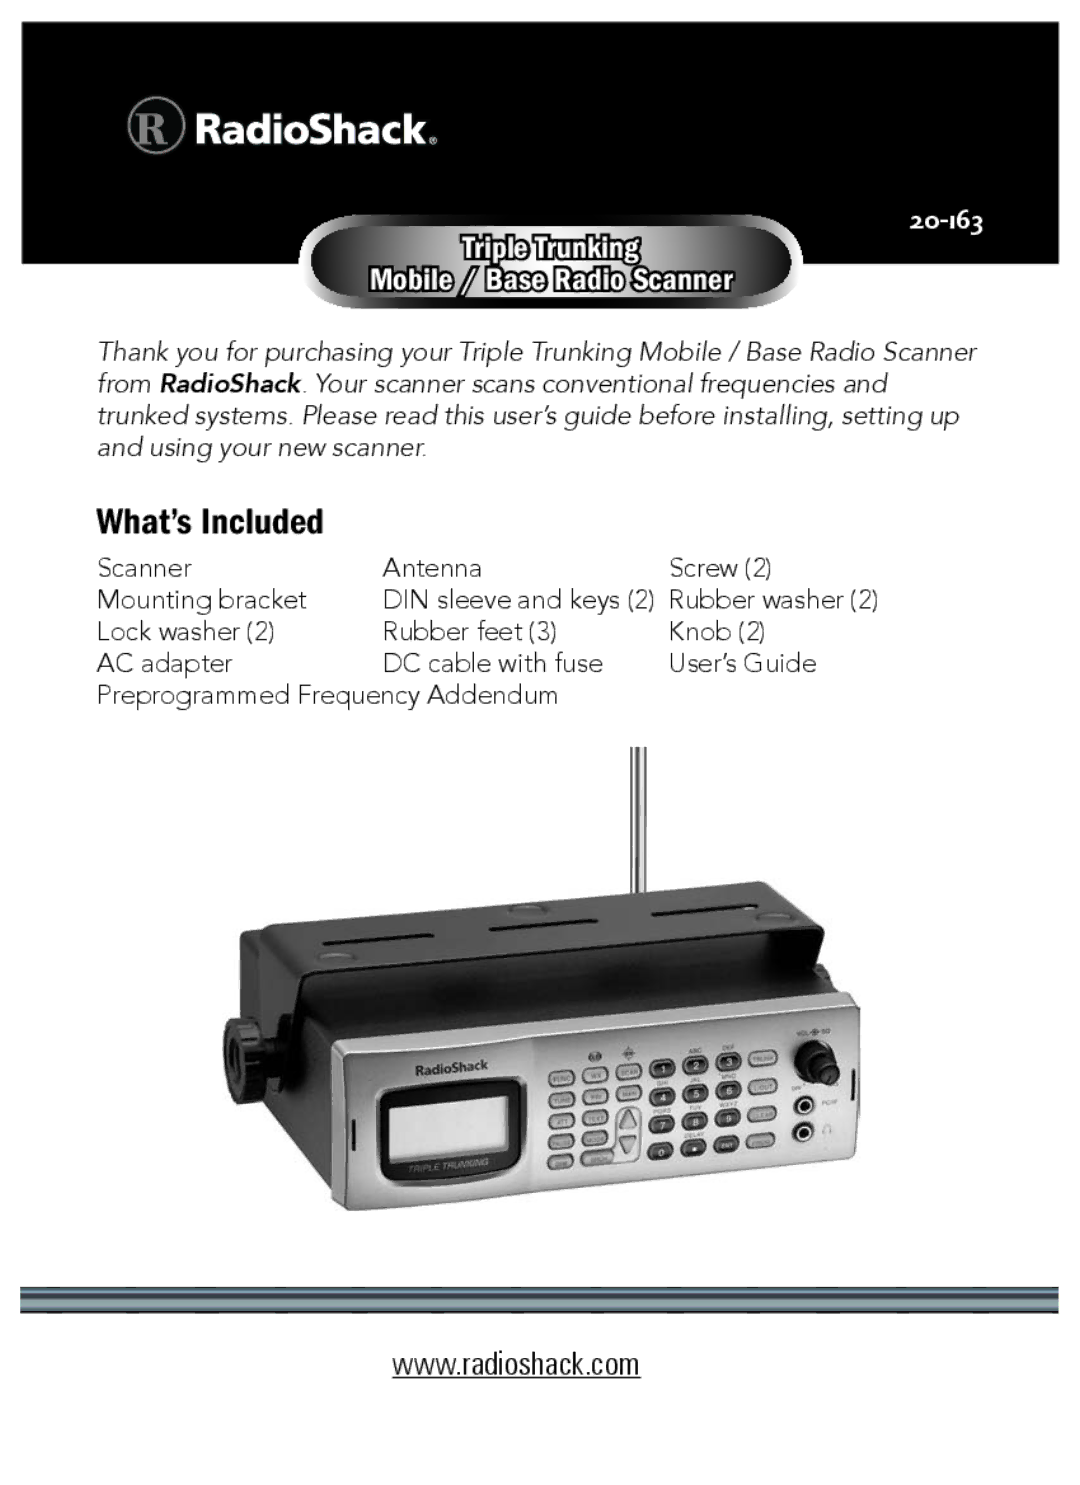 Radio Shack 20-163 manual What’s Included, Mobile / Base Radio Scanner 